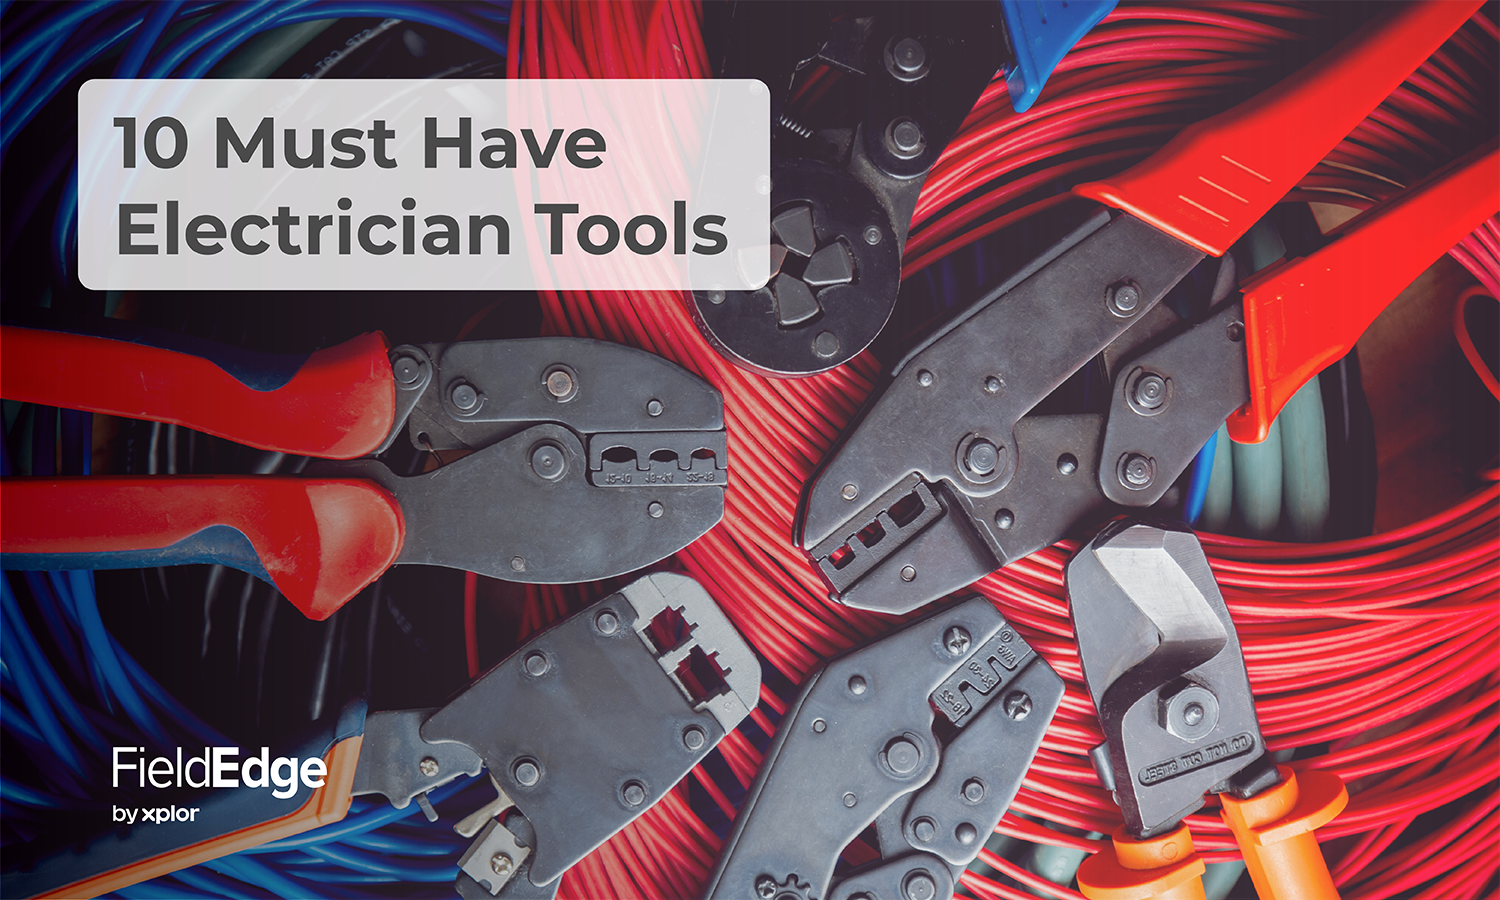 10 Must Have Electrician Tools - FieldEdge